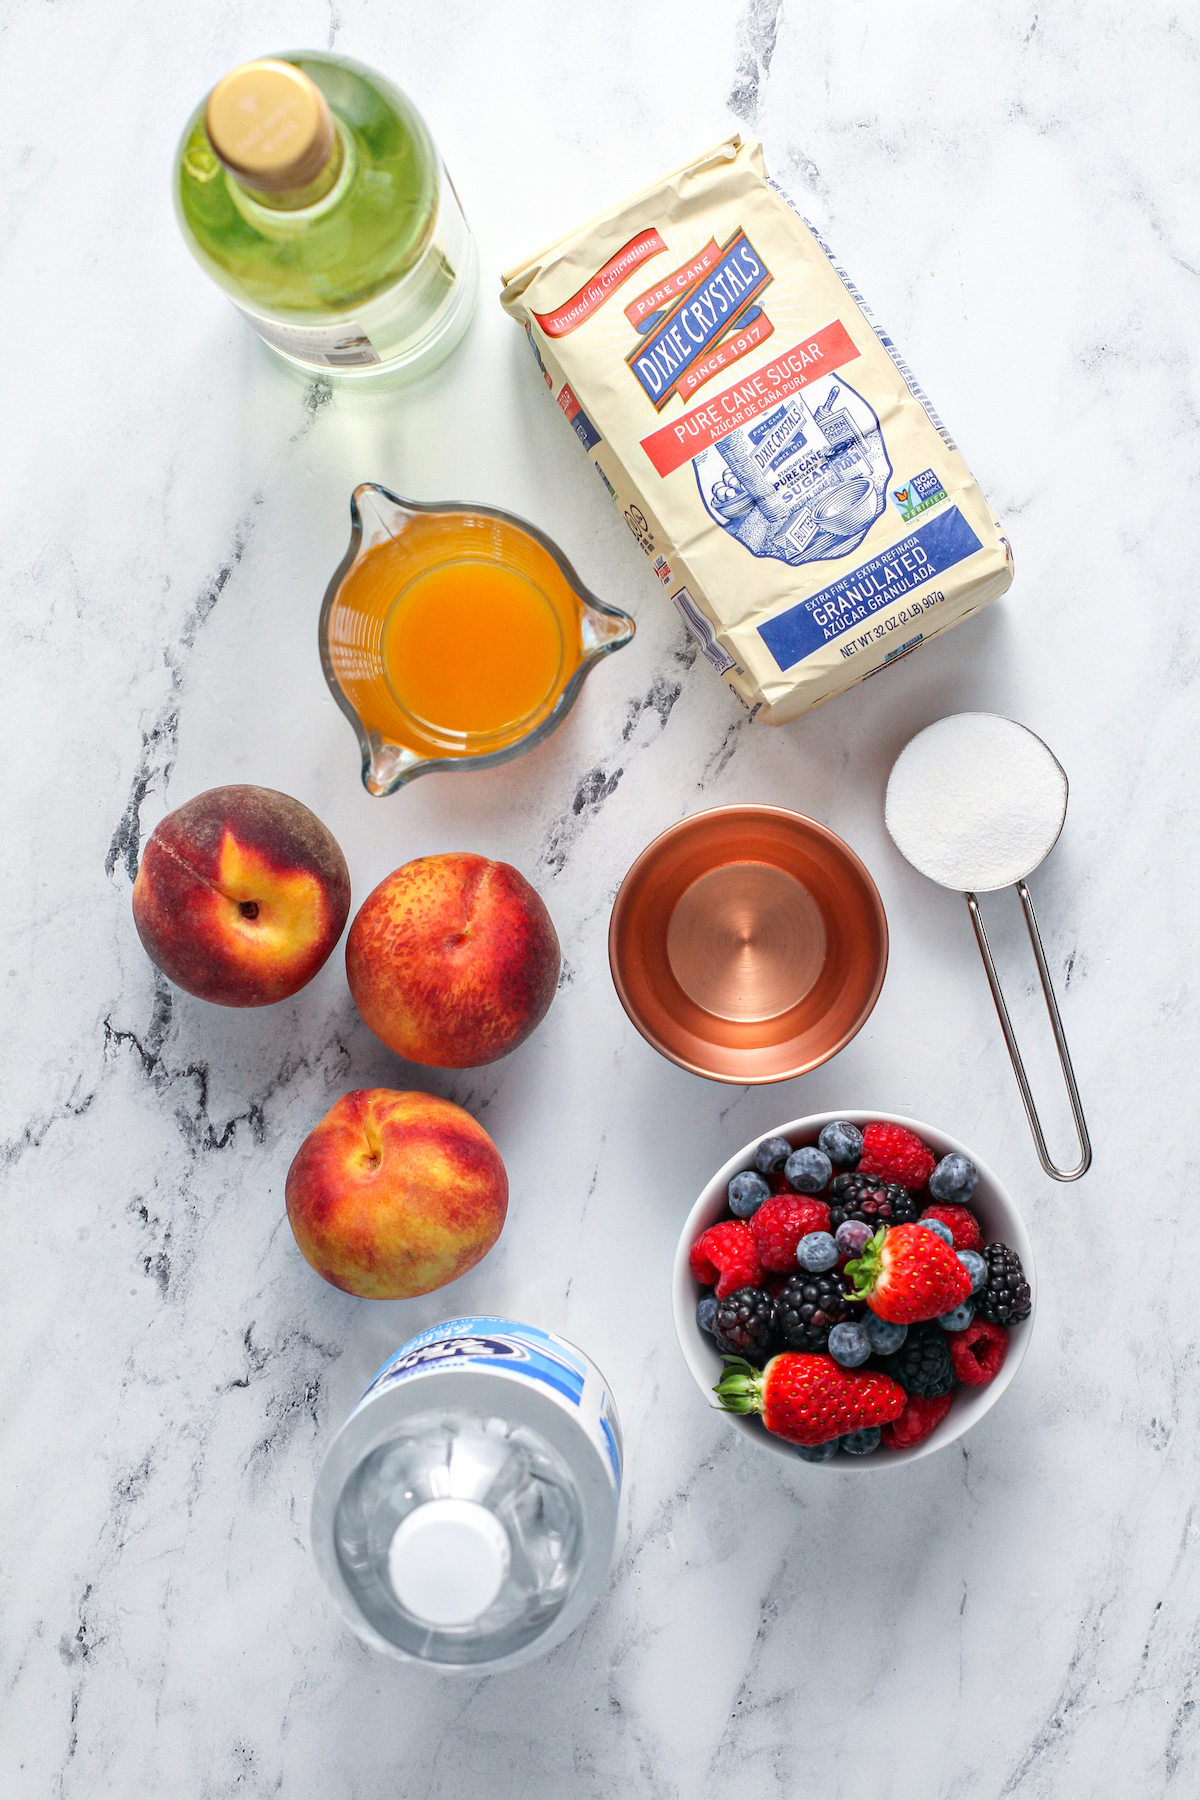 From top left: A bottle of white wine, sugar, peach nectar, fresh peaches, peach schnapps, mixed berries, seltzer.